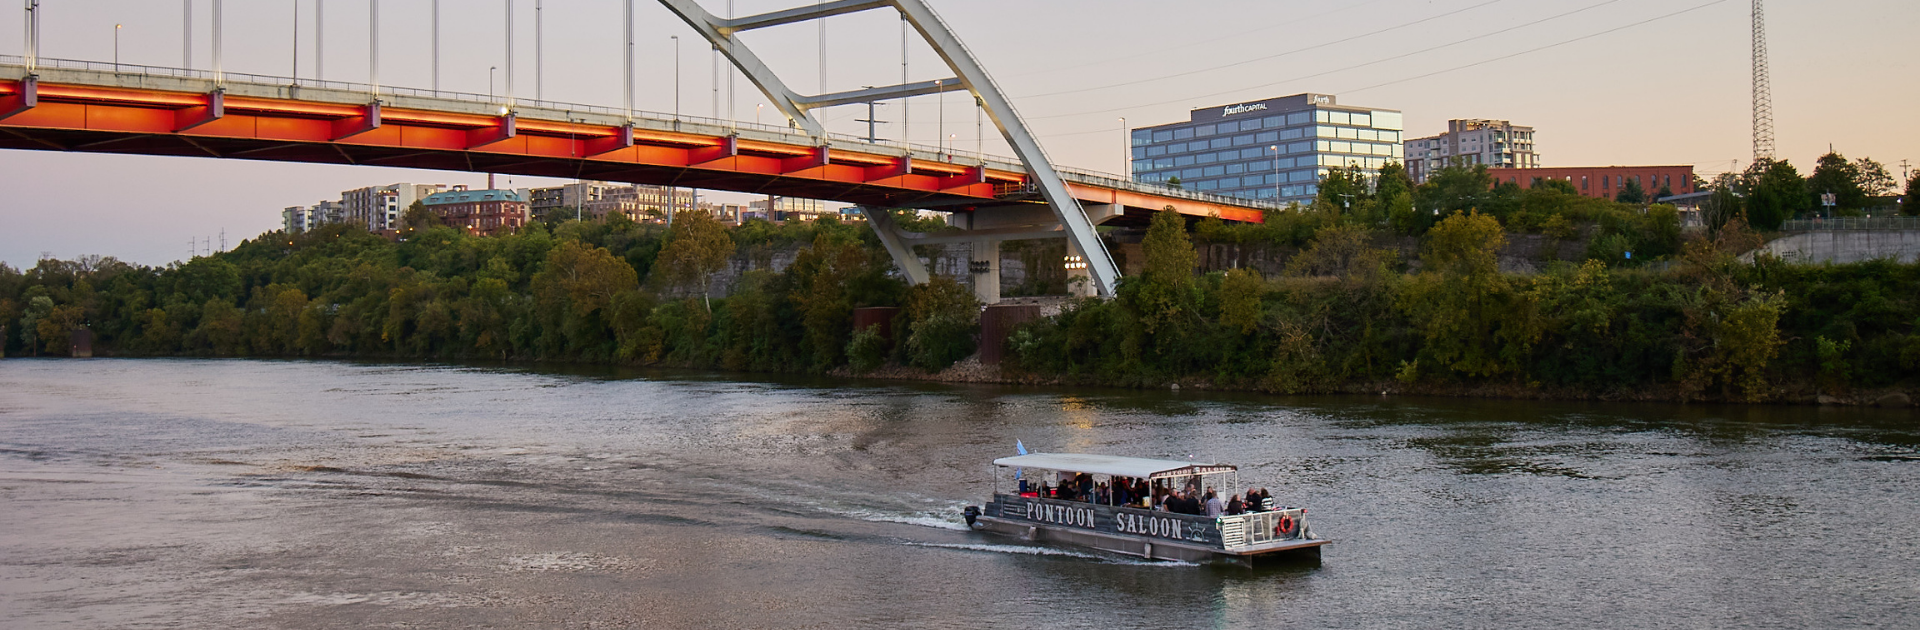 corporate group on a river cruise in nashville